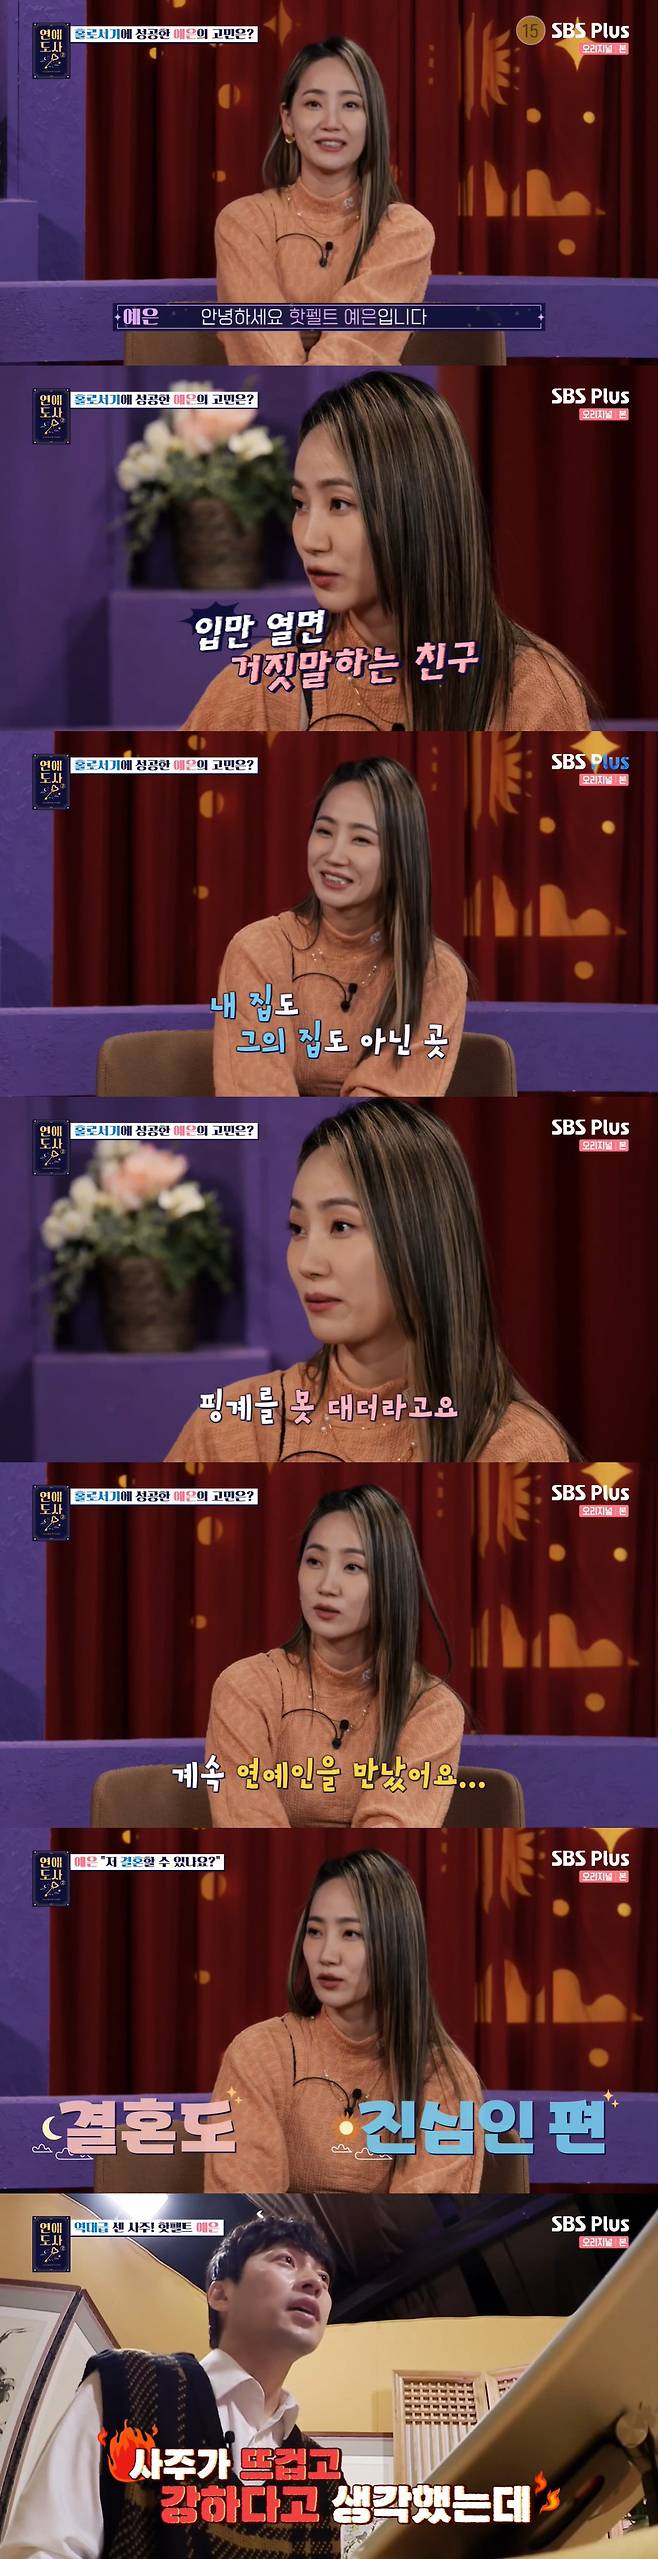 Love Dosa Park Ye-eun tears as he confides in his fatherIn the SBS Plus Love Dosa season 2, Park Ye-eun Park Ye-eun expressed his worries and worries about marriage.On this day, Park Ye-eun is famous for his autobiographical song lyrics: I did a lot of bright songs during Wonder Girls, and Park Ye-eun worked a lot on stories inside.There are many sad stories, he said.Park Ye-eun said: I hate lying, I had a friend who lied when I just opened his mouth.I found a paper in the car, but it was a parking pass.  It was not my house, his house, and the time was 5 am. I could not excuse it. I think I have done love more than 10 times, he said. I think about marriage every time I do love.Park Ye-eun, who met Sajudo after that, said, I can marriage. If I can be happy, I want to marriage, but I do not want to be unhappy because I marriage.My mother did a divorce, but now she remarried and lived happily, but I know how hard it was after divorce, so I hate divorce.If you are marriage, I want to do it when the probability of divorce is less than 0.1%, but I do not know people. Park Ye-euns owner, who is very strong and strong, is also a man who can not bear it. Park Ye-eun said, All love was a man in his 20s.When I was a child, I thought I was meeting my peers, but now that I am thirty-three, I am getting older, and the men are getting younger.Park Ye-eun wept, also referring to his father.Park Ye-eun was arrested for the Records of the Grand Historian crime at the stage of a new start at the time of moving the company after a decade at JYP.Park Ye-eun said, When I was a child, my parents gave me a duty, so I did not see it for a very long time and hated it a lot.I started to contact and meet again three to four years before I was arrested for the Records of the Grand Historian, he said. I thought it was because I did not have confidence in my father because I could not trust a man.I thought I should restore my relationship with my father. Park Ye-eun said: Im so sorry, Im sorry I hurt you so much when I was a kid.I thought that I was Lee Yong when the incident broke out. He said, My father was my father.It seems impossible to believe in people. Especially to believe in men. Park Ye-eun, who put himself down a lot at the time, said, Do you feel like living? I smoke tobacco, drink a lot of alcohol, and meet a man.The company, which later judged Park Ye-euns condition to be poor, recommended psychological counseling, and said, I received about a year, I think I healed the wound while talking about it.Park Ye-eun said: Fortunately, my mother remarried, she did it seven years ago and her husband is a good person.I am living with my mother and receiving all the love that my mother did not receive.  I also thought positively that I could meet a good man. I like the person who accepts and accepts me, said Cold Dosa, who was 54, 55, and 56 years old when Park Ye-eun was lucky to be marriage.